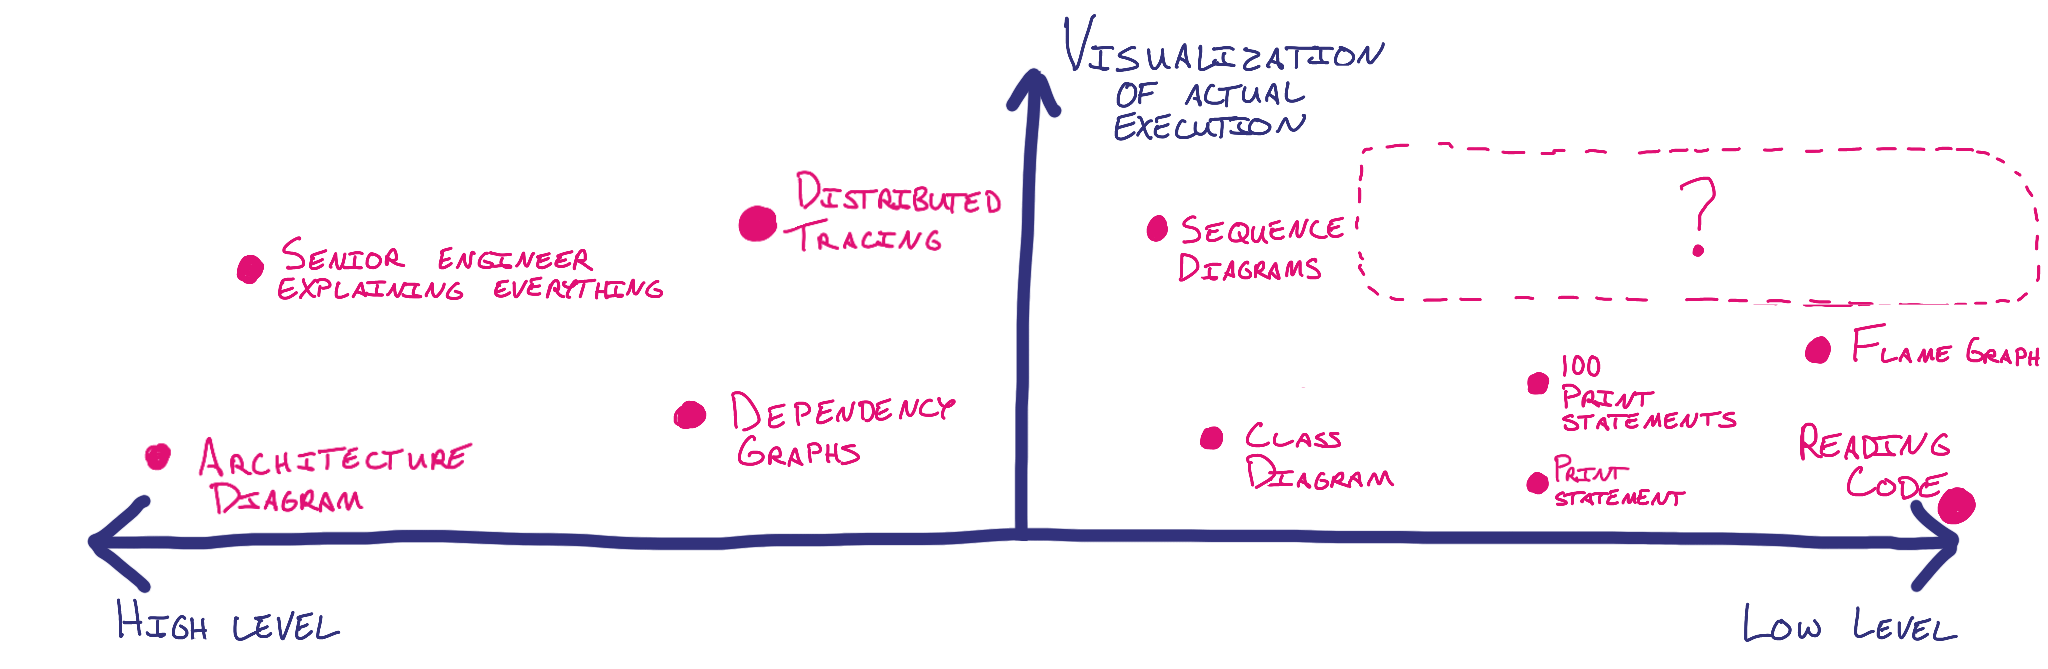 Ranking the above visualizations on a scale from high level to low level along the x axis and “visualization of actual execution” on the y axis